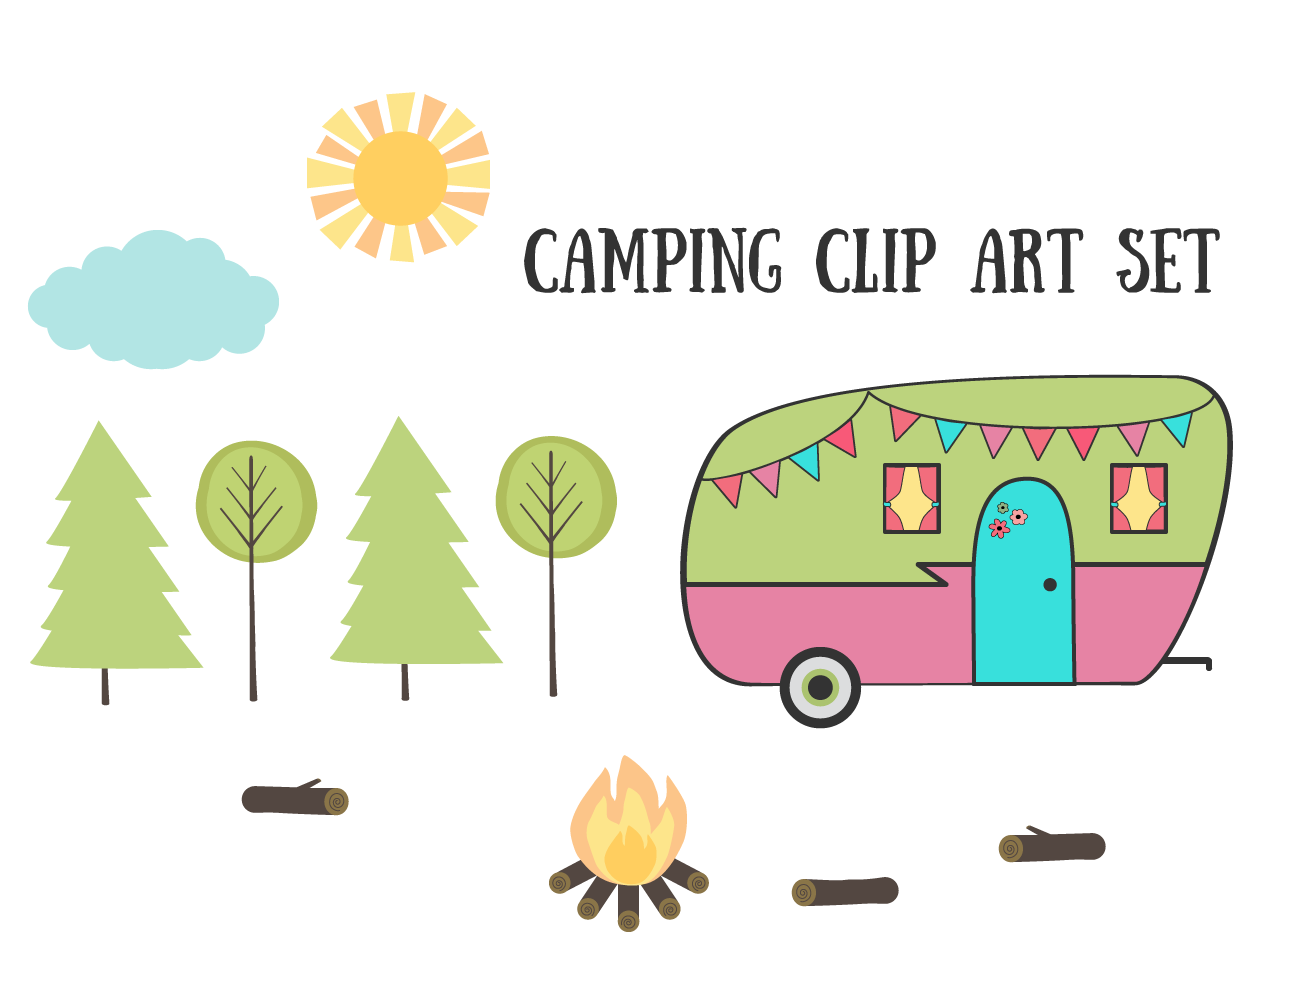 Camping kids camp clip art clipart image 0